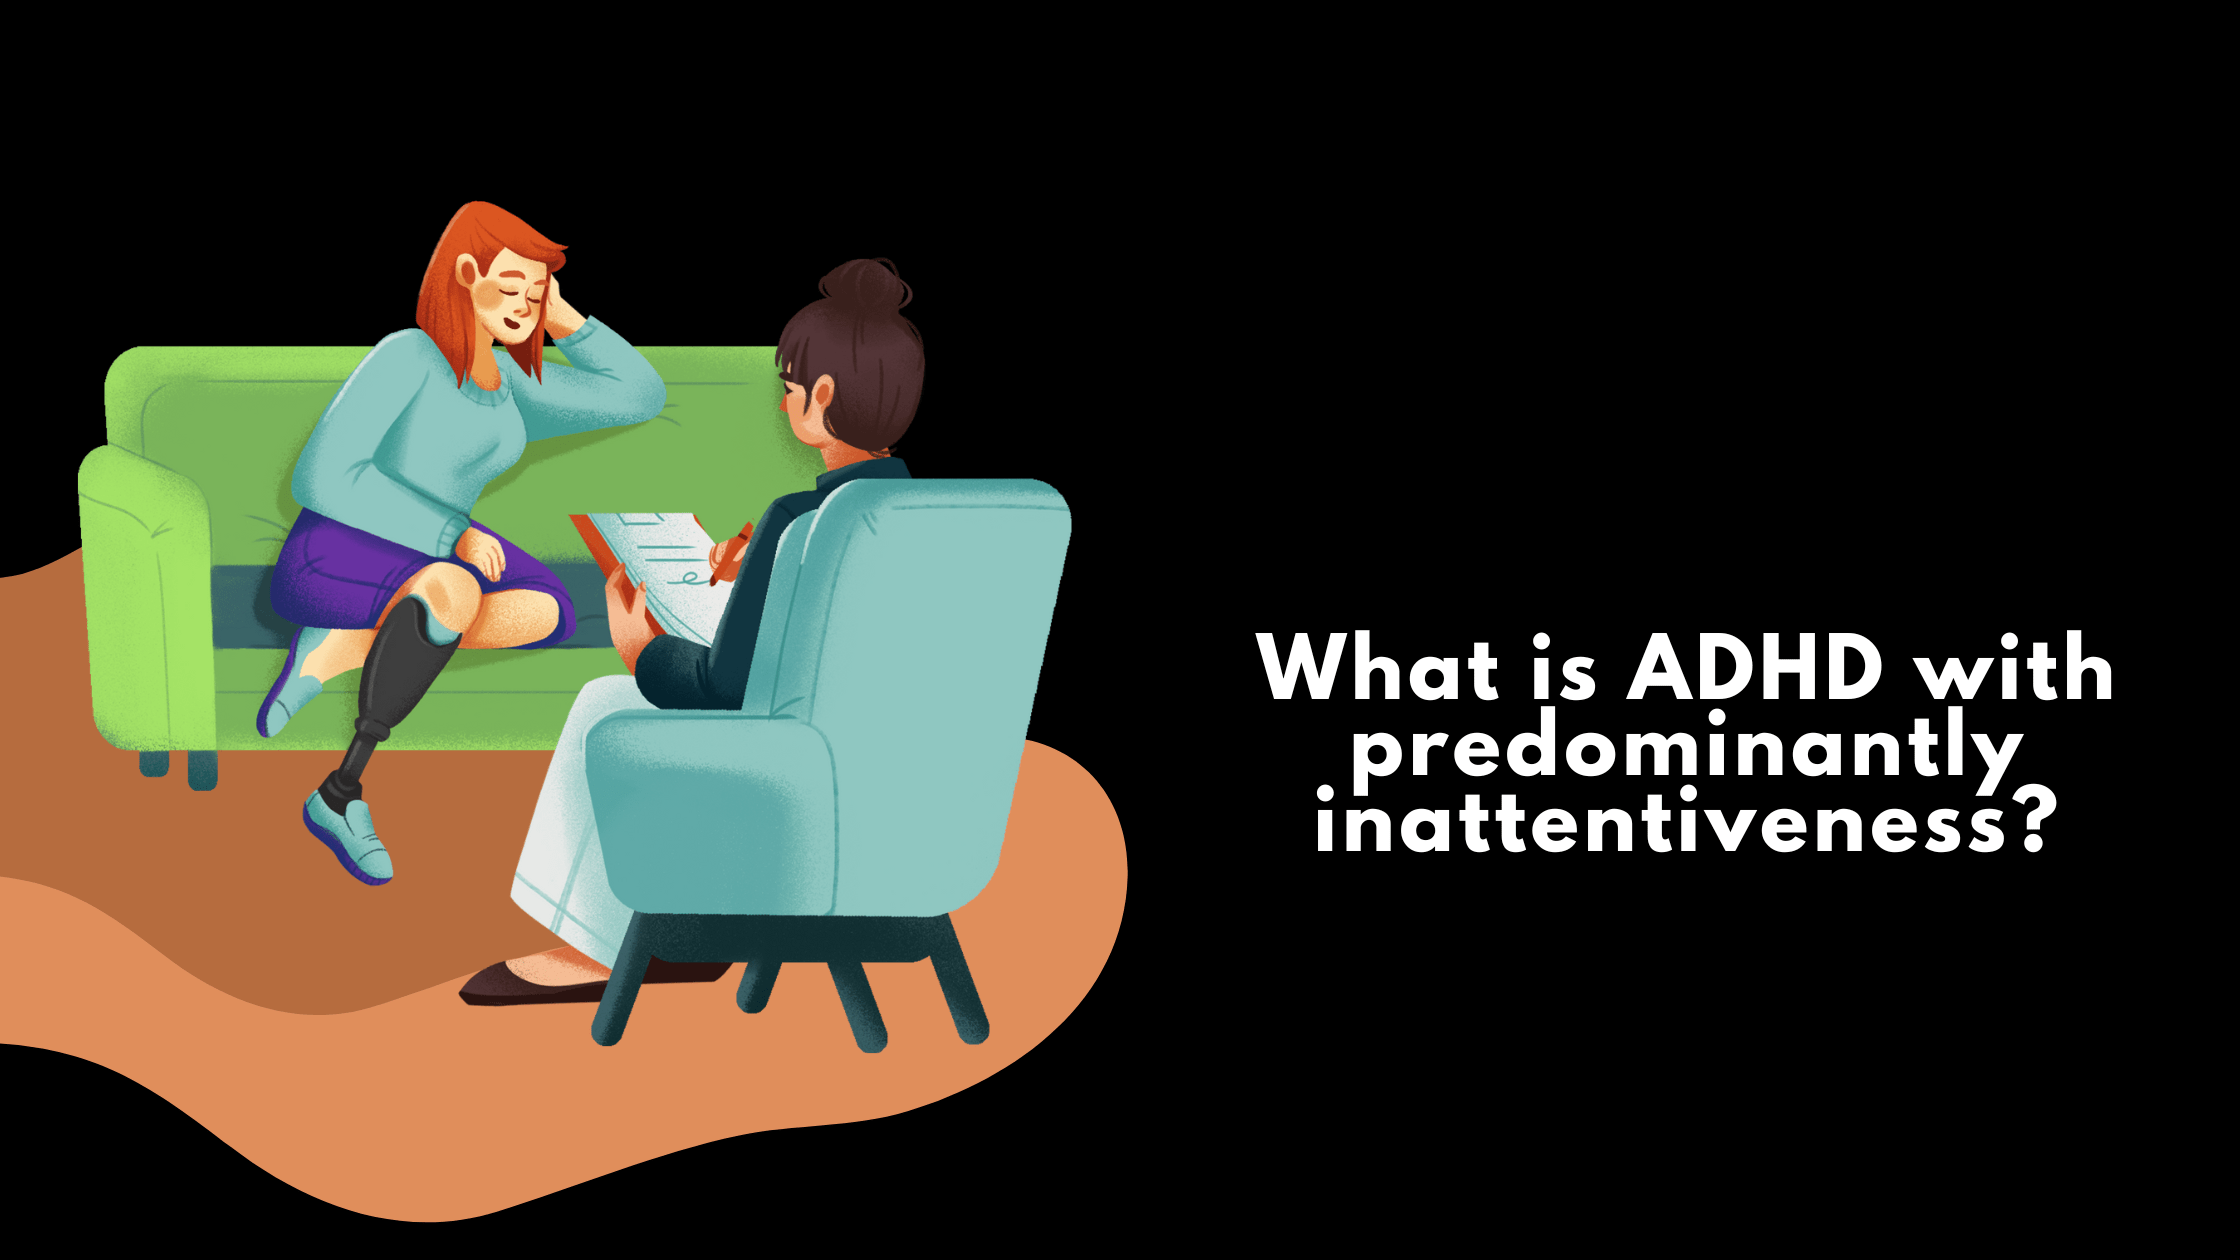 What is ADHD with predominantly inattentiveness